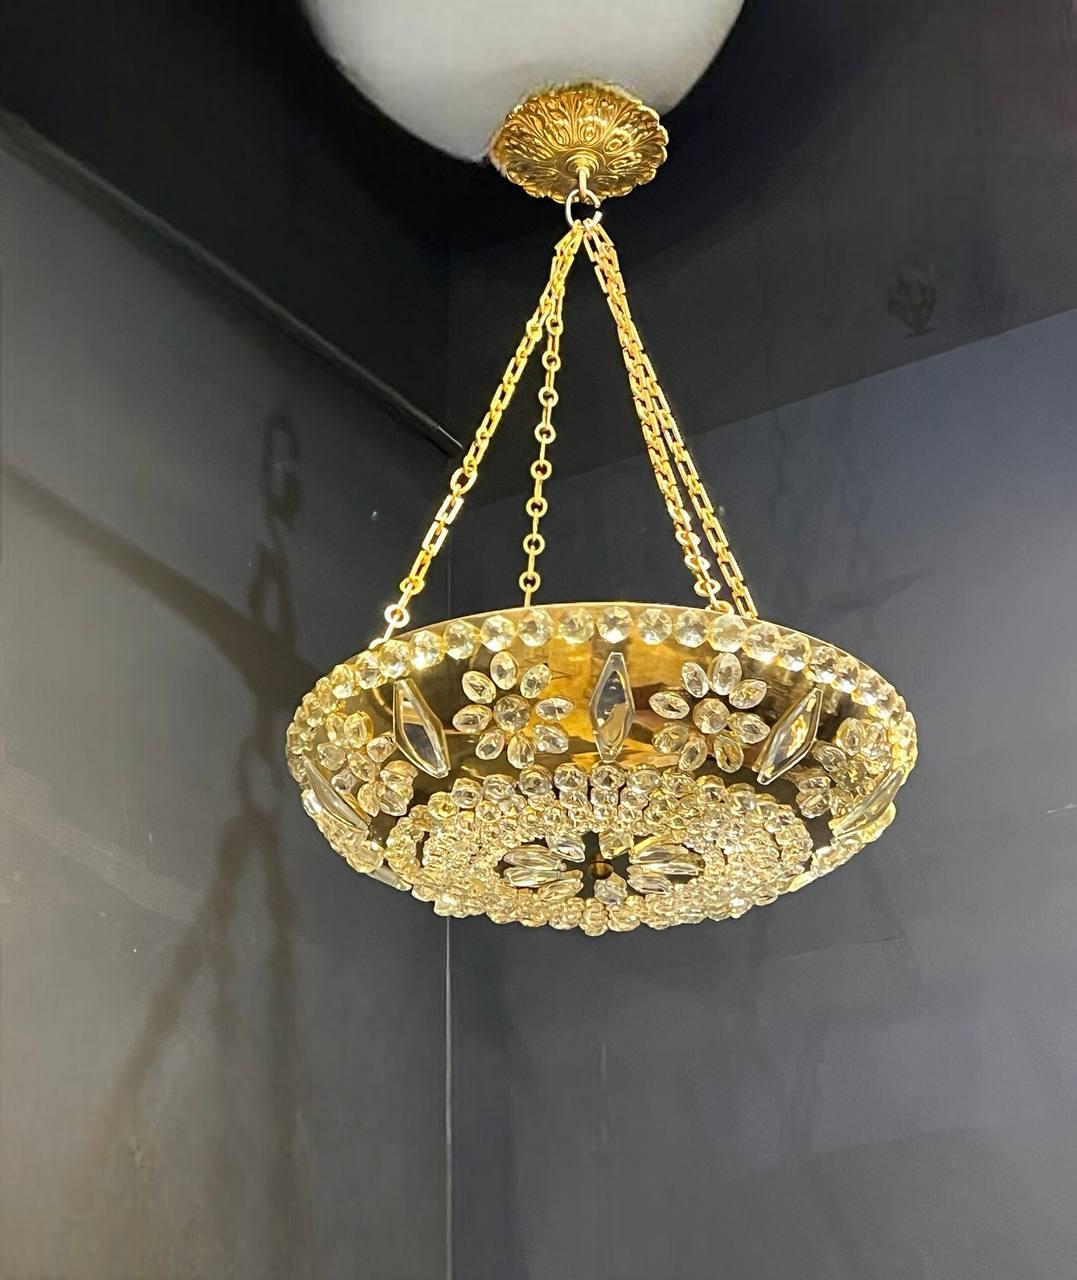 1930's French Gilt Bronze Light Fixture with Beaded Glass For Sale 2